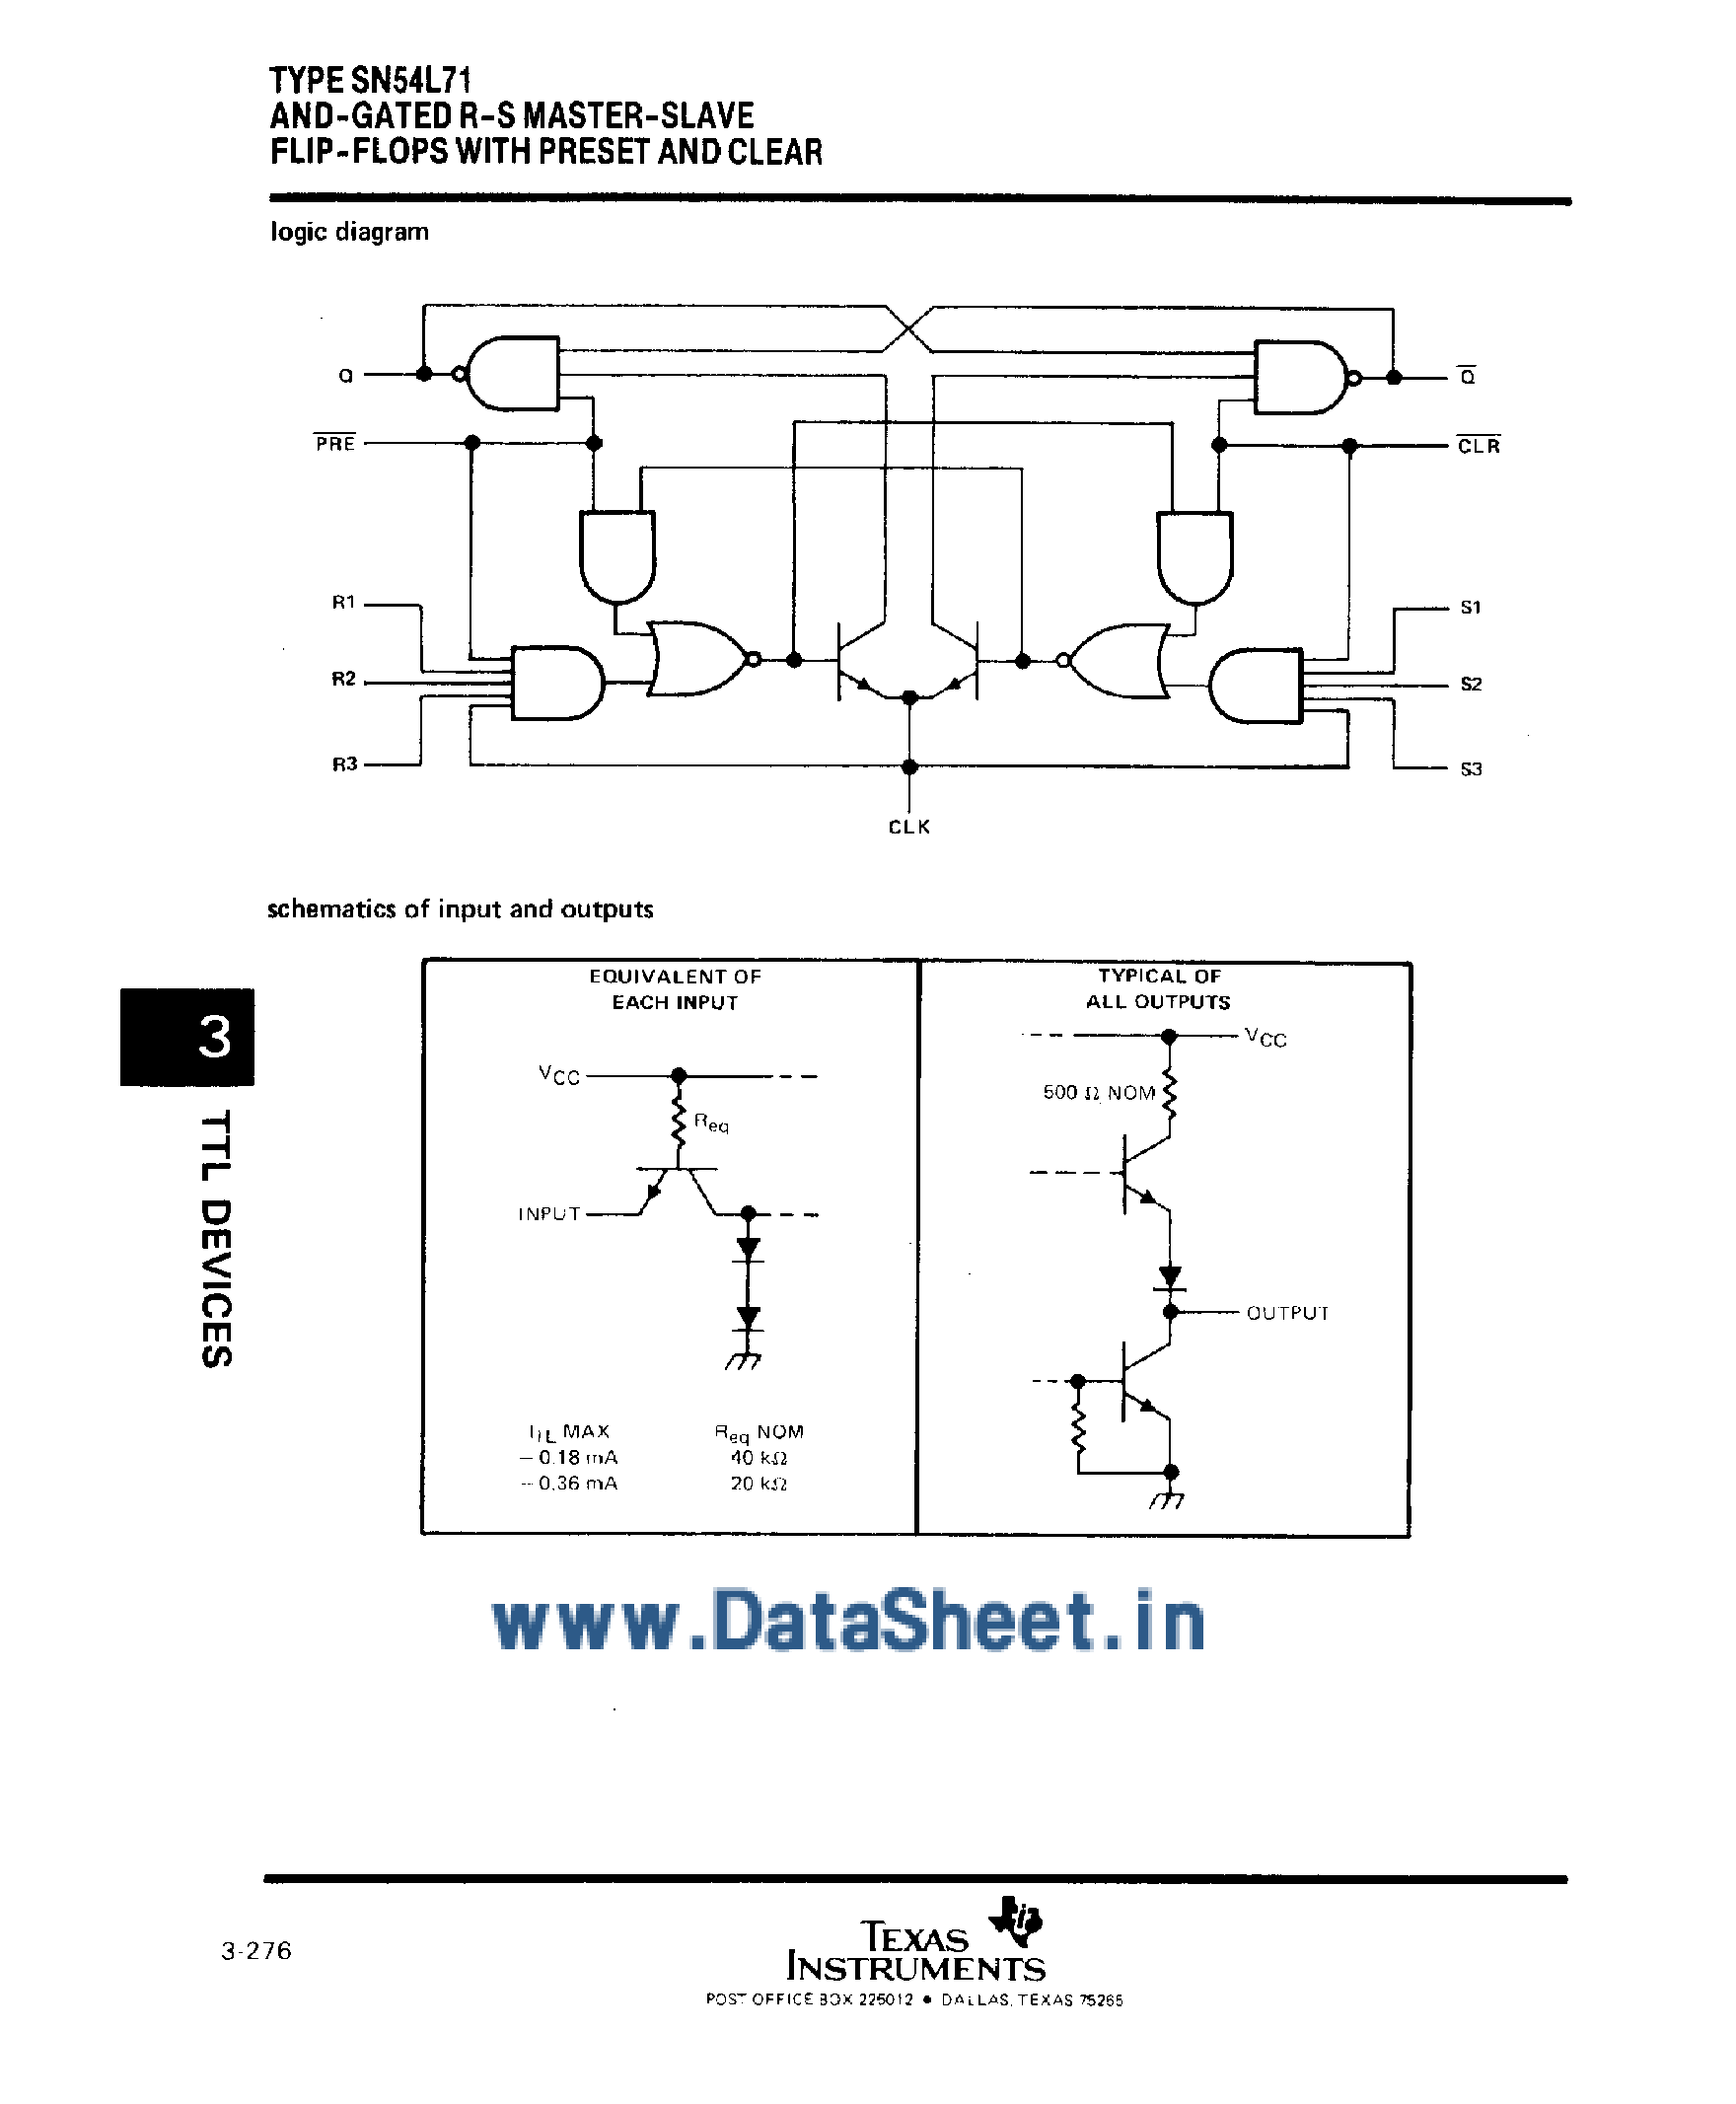 Datasheet SN74L71 - AND-Gate R-S Master-Slave F-F page 2